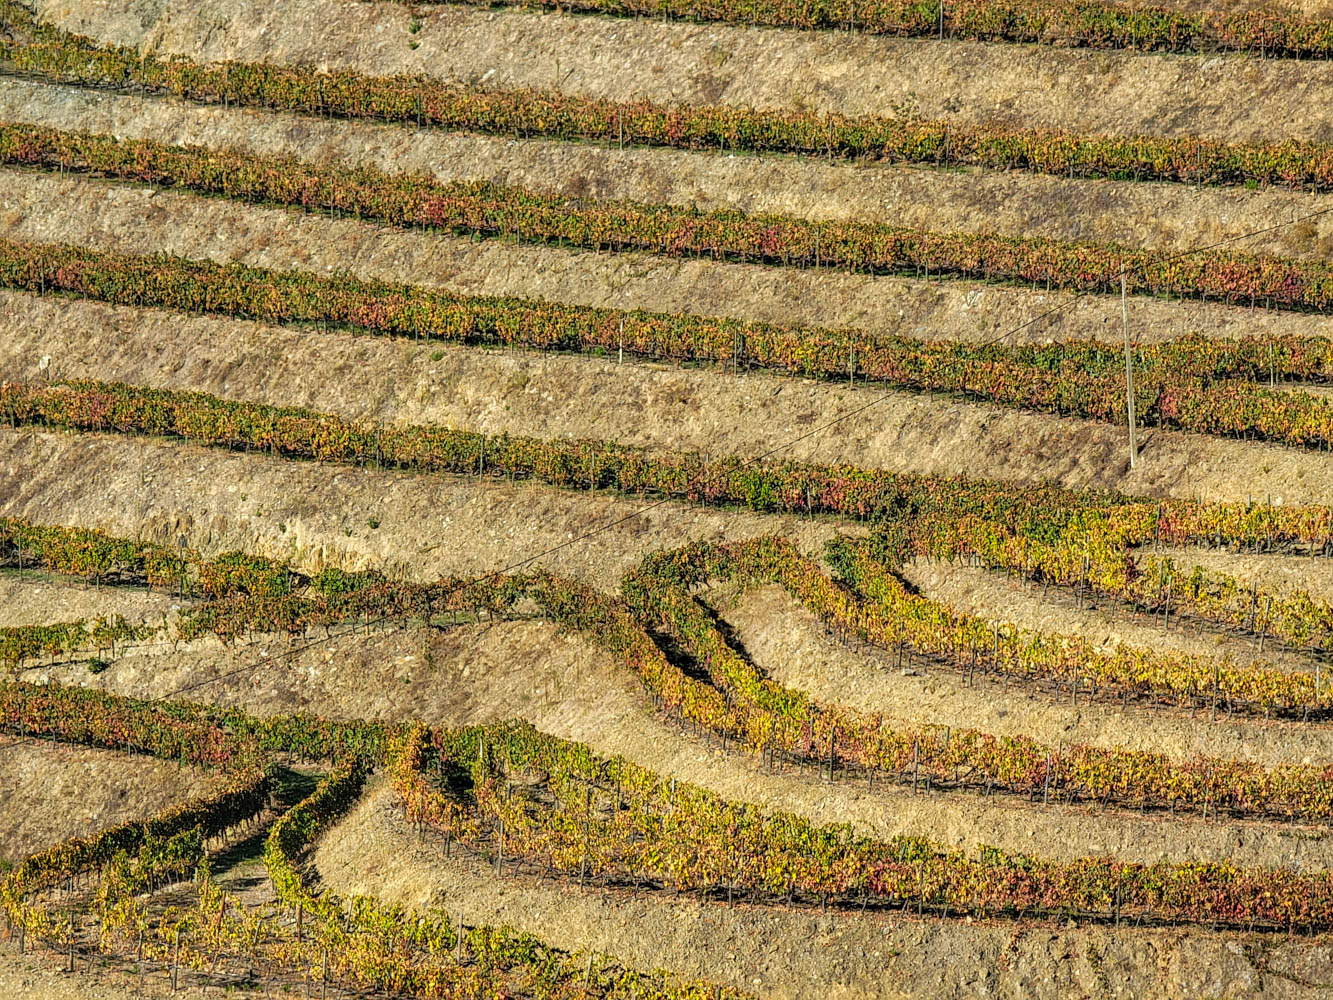 Terraces in the Douro